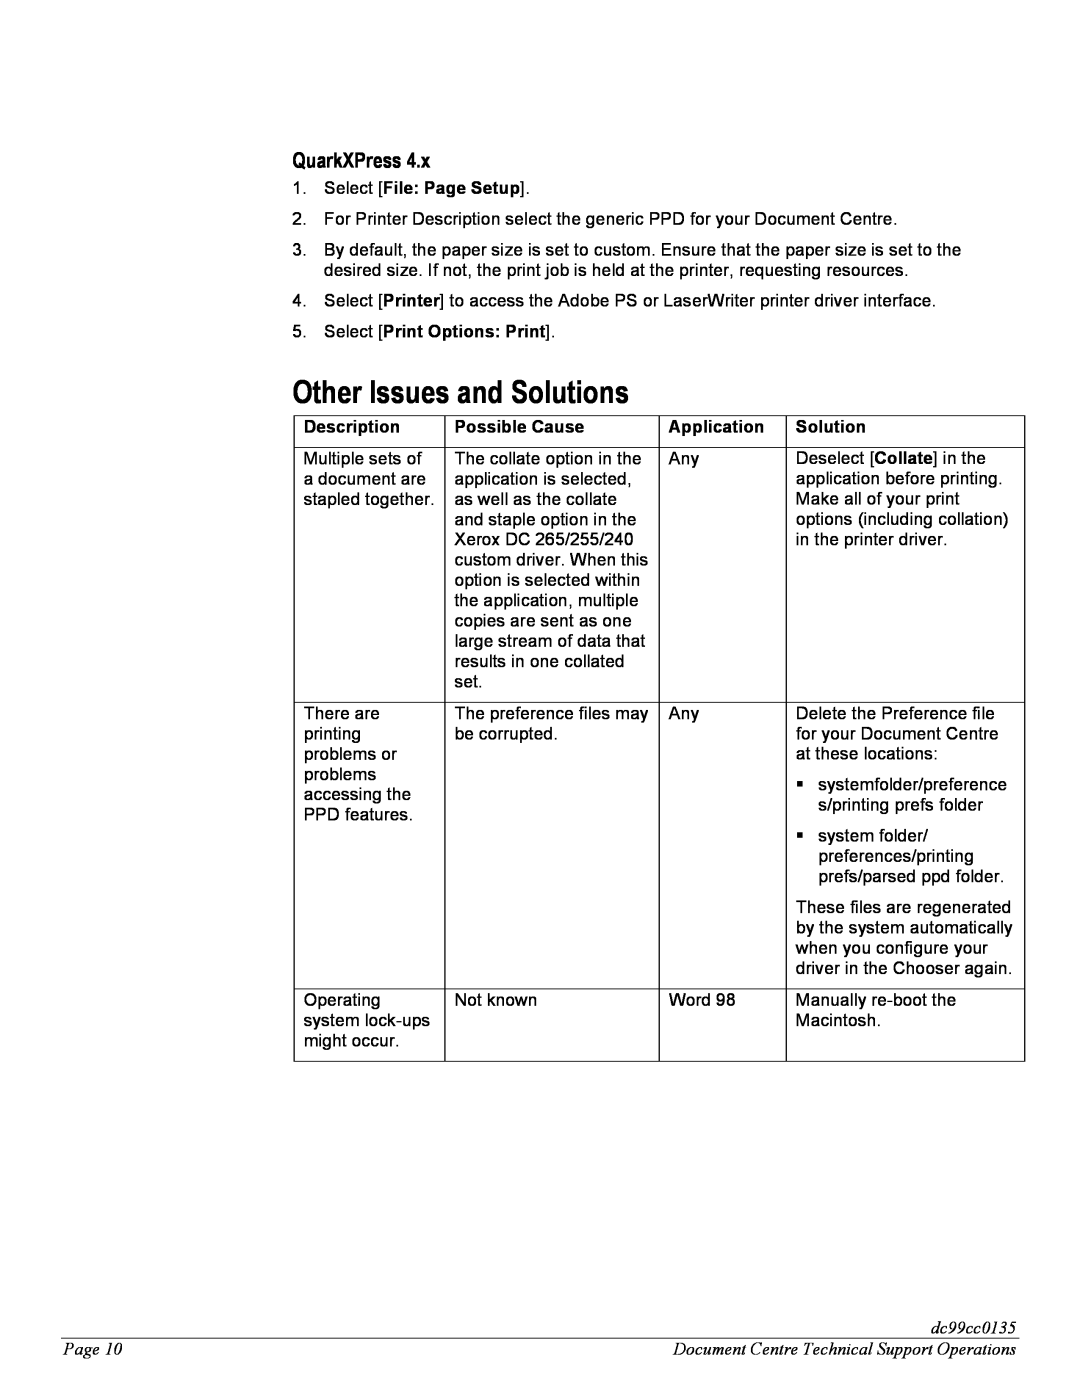 Xerox DC 265/255/240 manual Other Issues and Solutions, QuarkXPress, Select File: Page Setup, Select Print Options: Print 